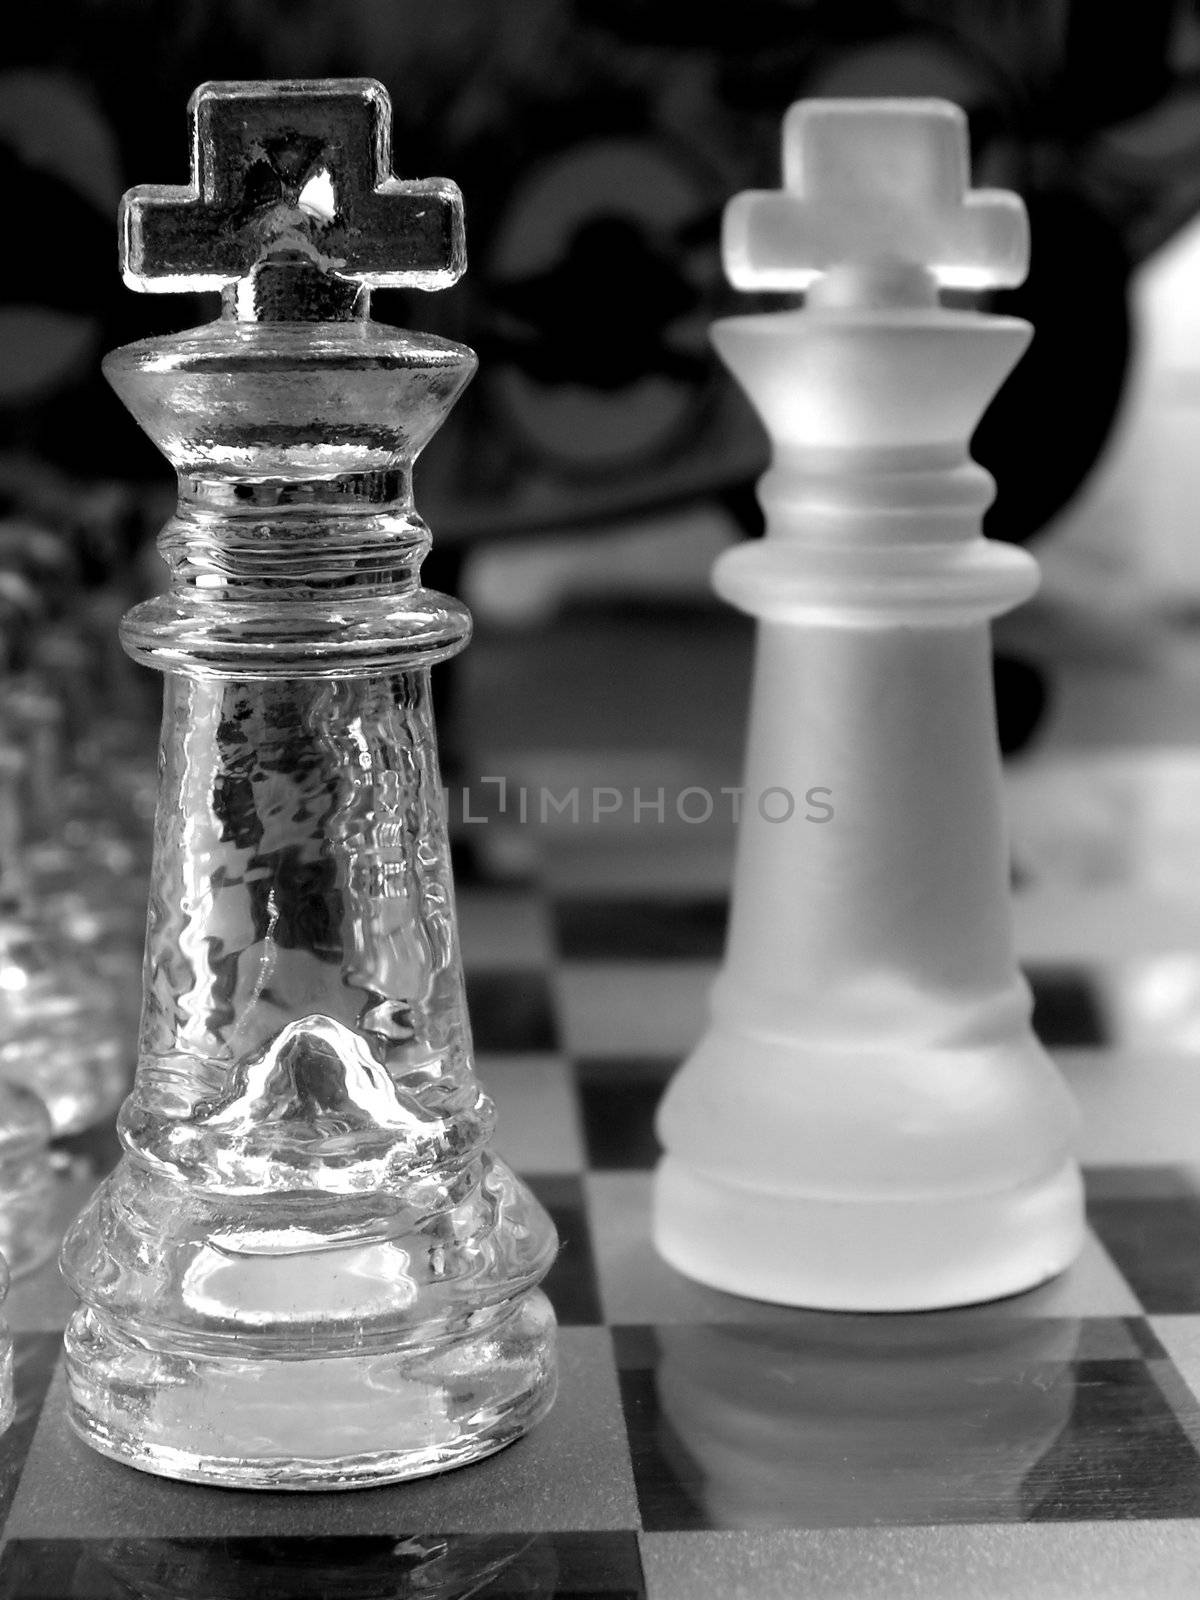 kings in a glass chess set